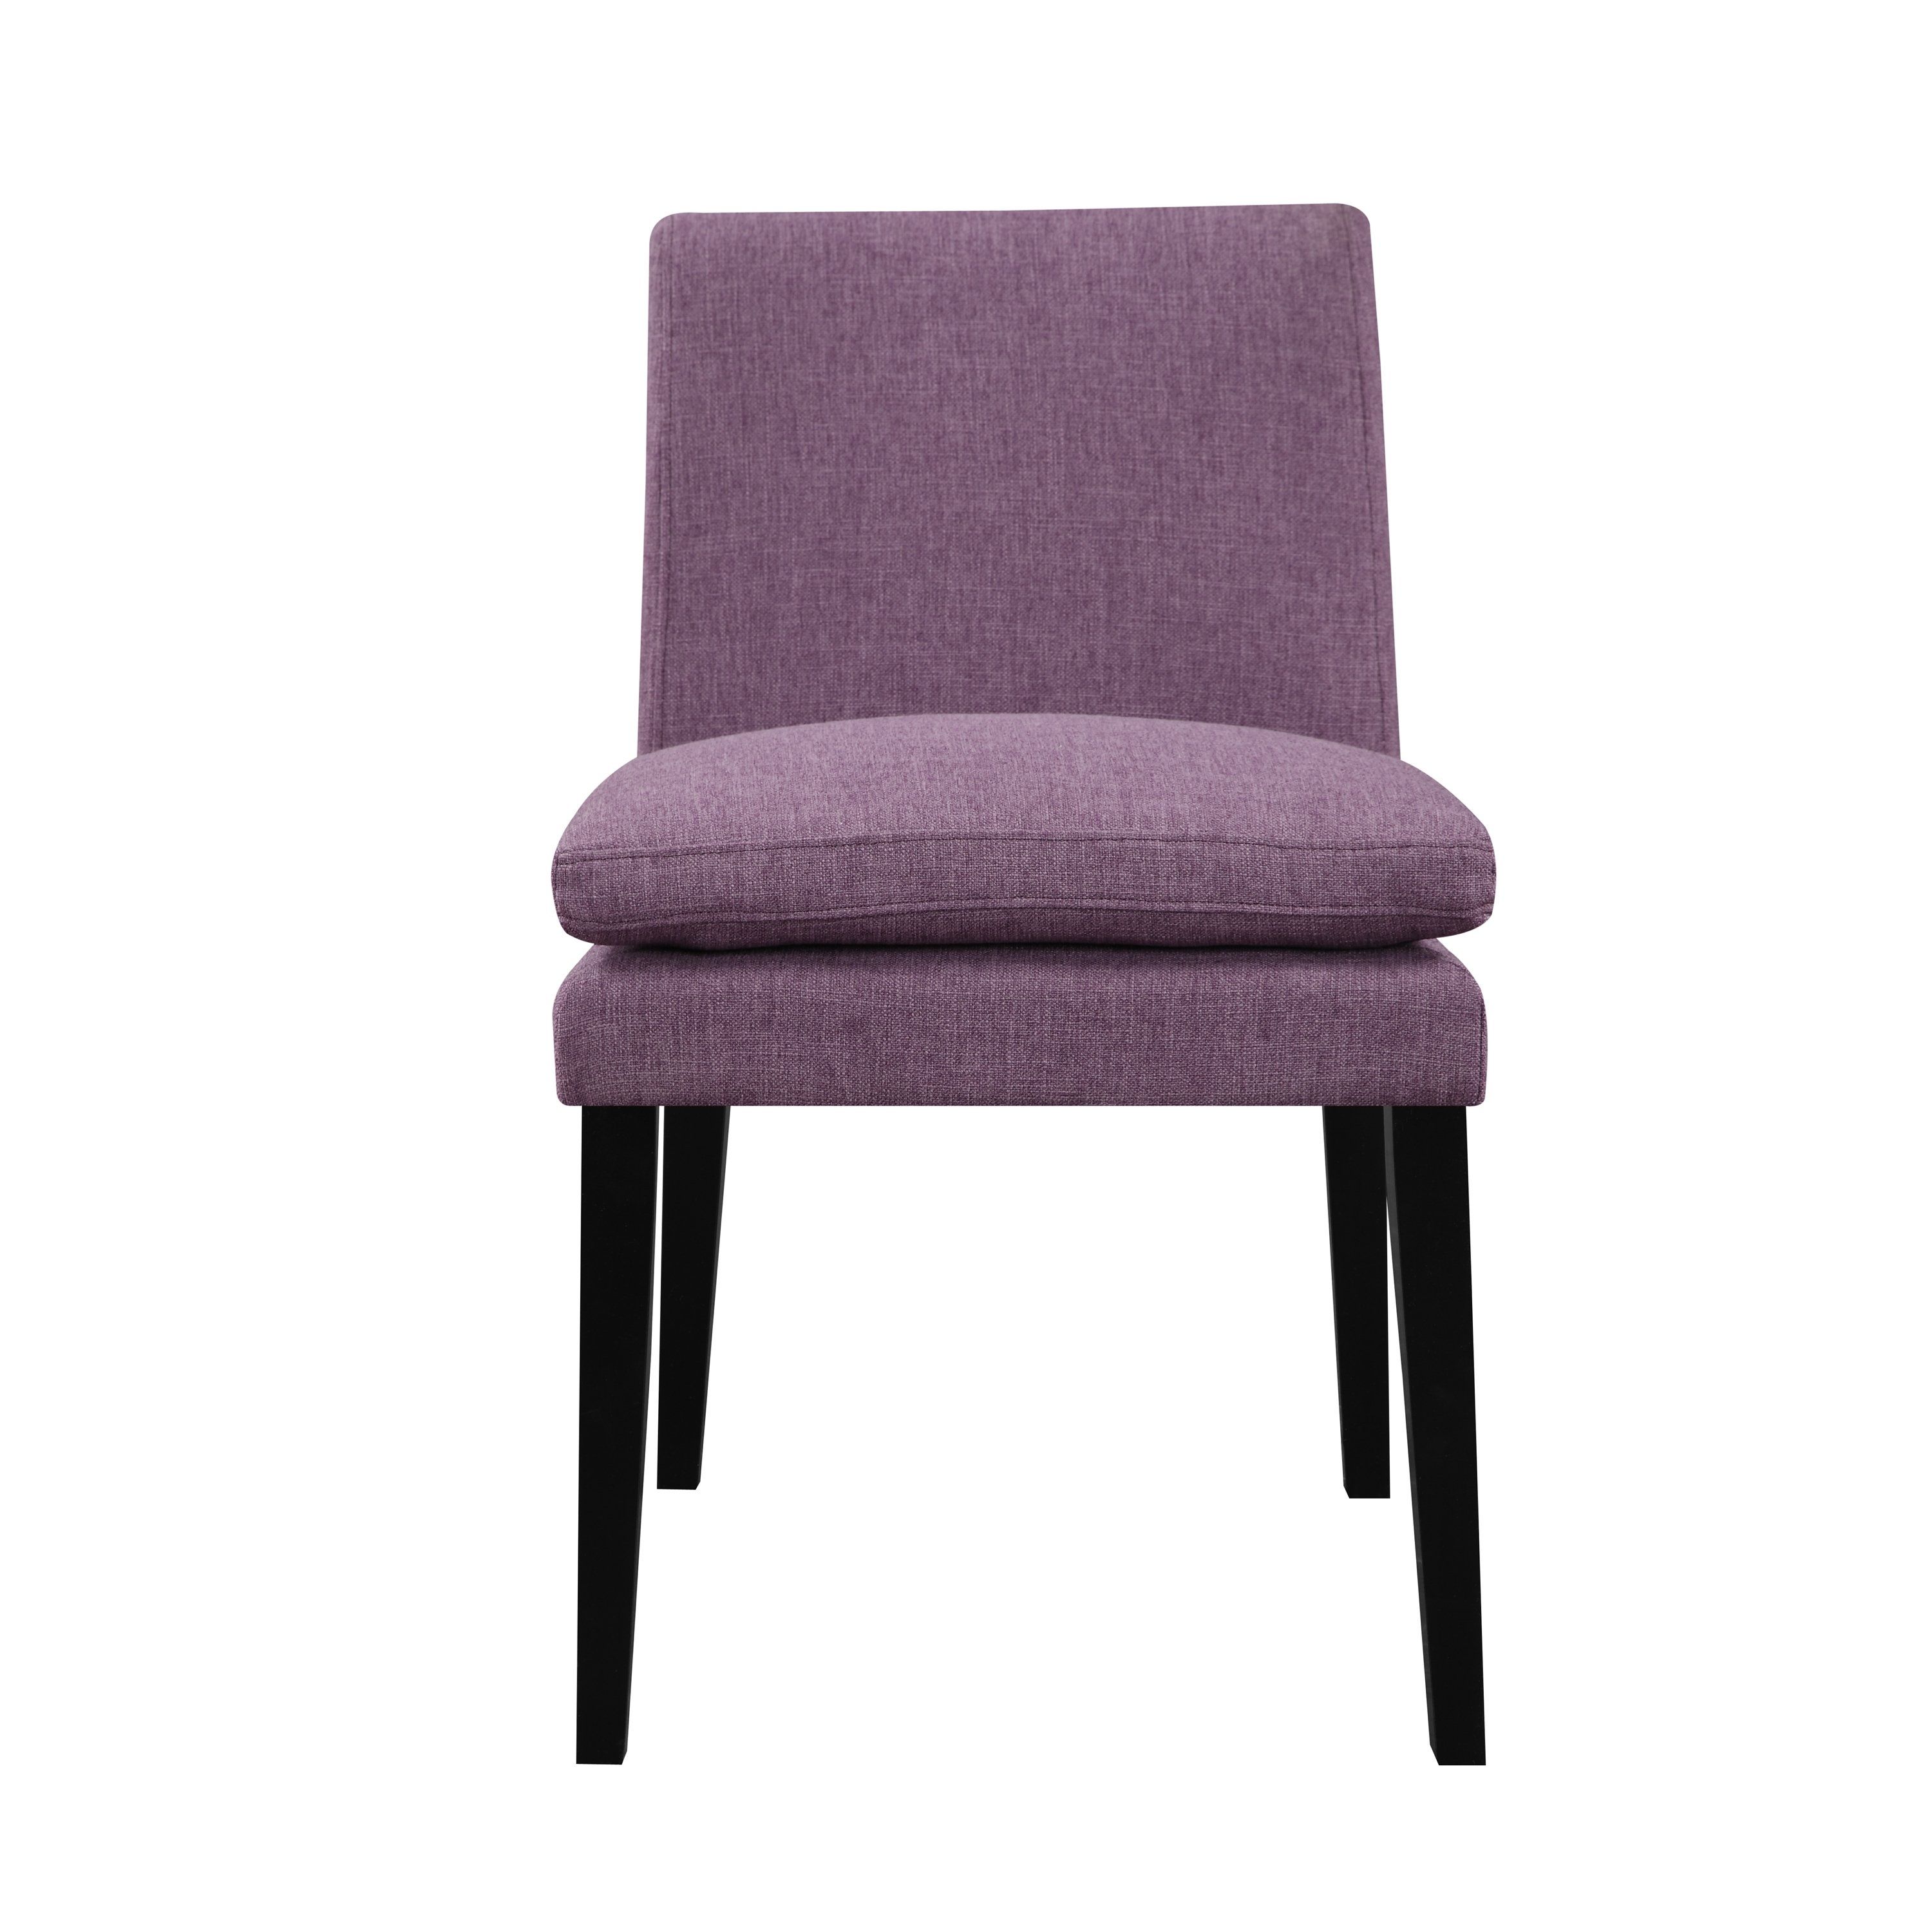 Well Liked Orion Side Chairs With Regard To Shop Handy Living Orion Amethyst Purple Linen Upholstered Dining (View 9 of 20)